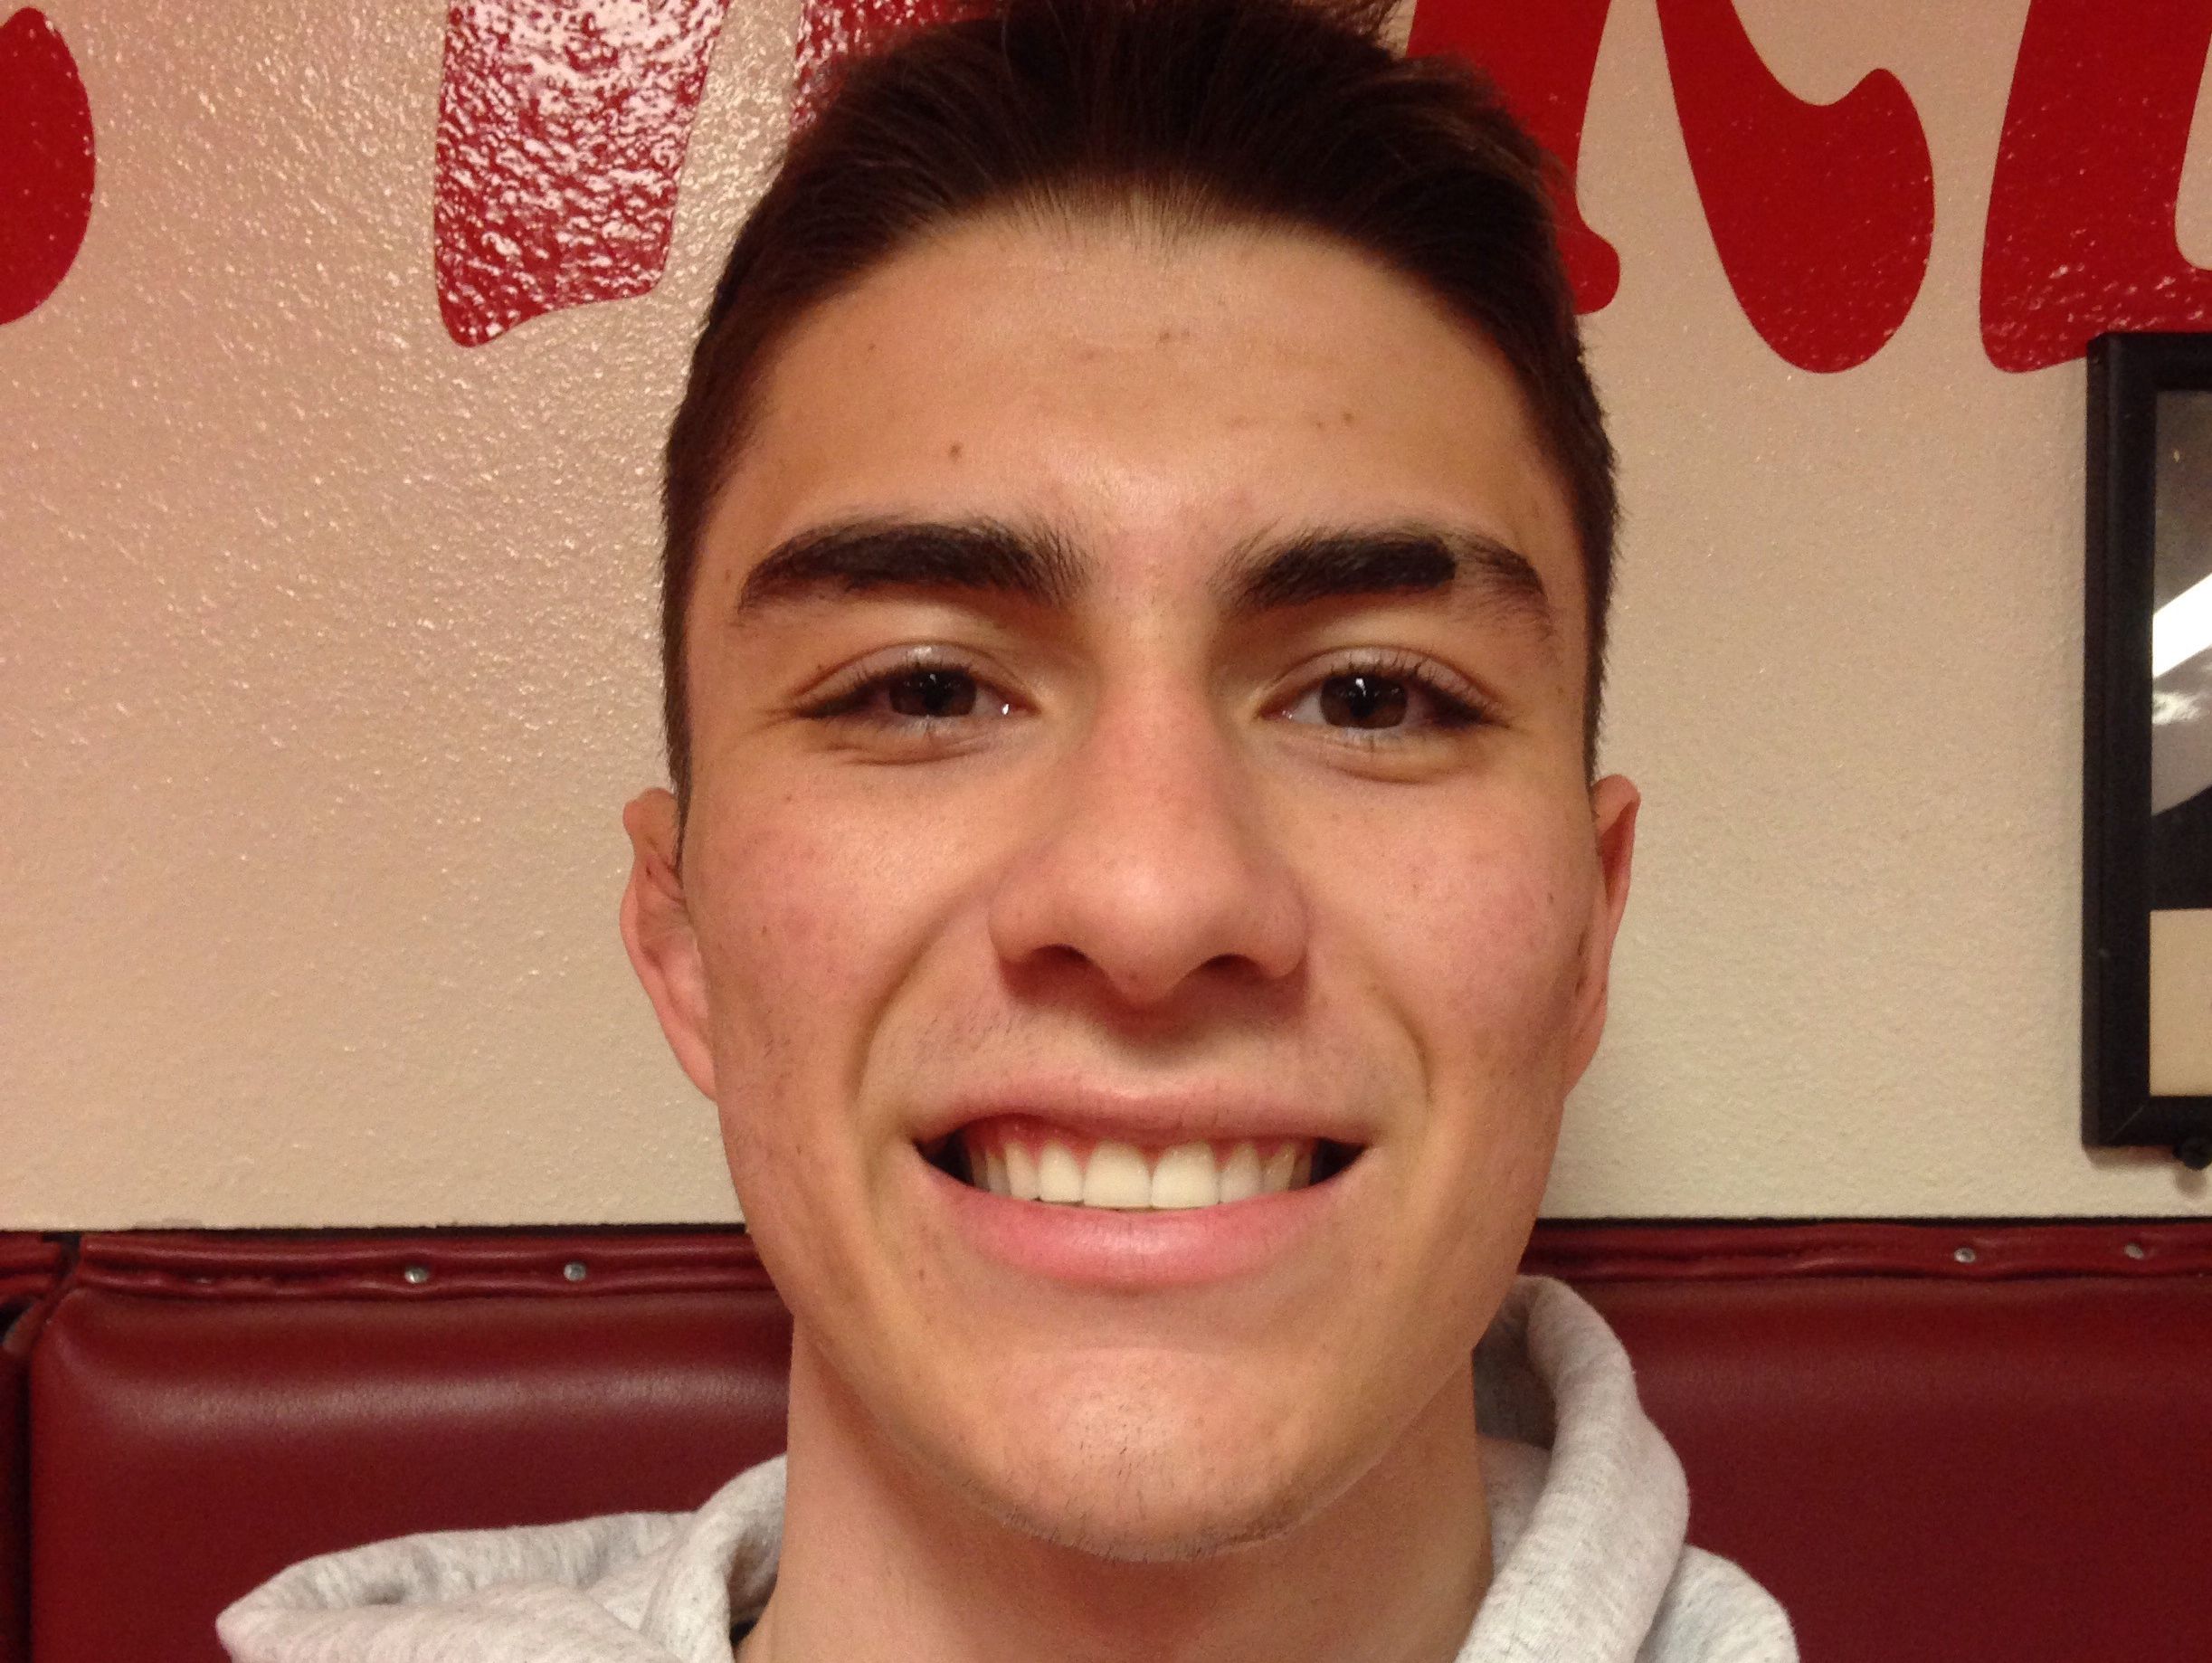 Marco Groves, from Tempe McClintock, is azcentral sports' Male Athlete of the Week, presented by La-Z-Boy Furniture Galleries, for Feb. 4-11.